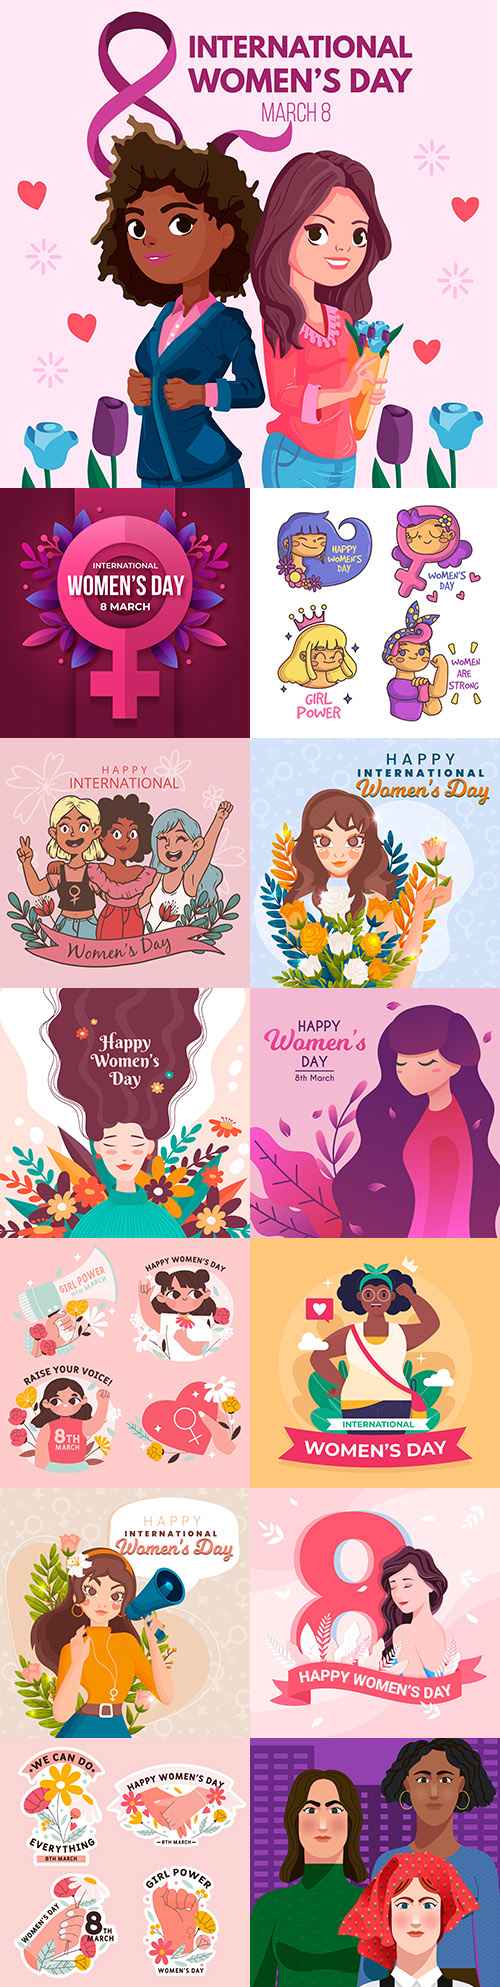 International Women's Day 8 March illustration with woman and flowers